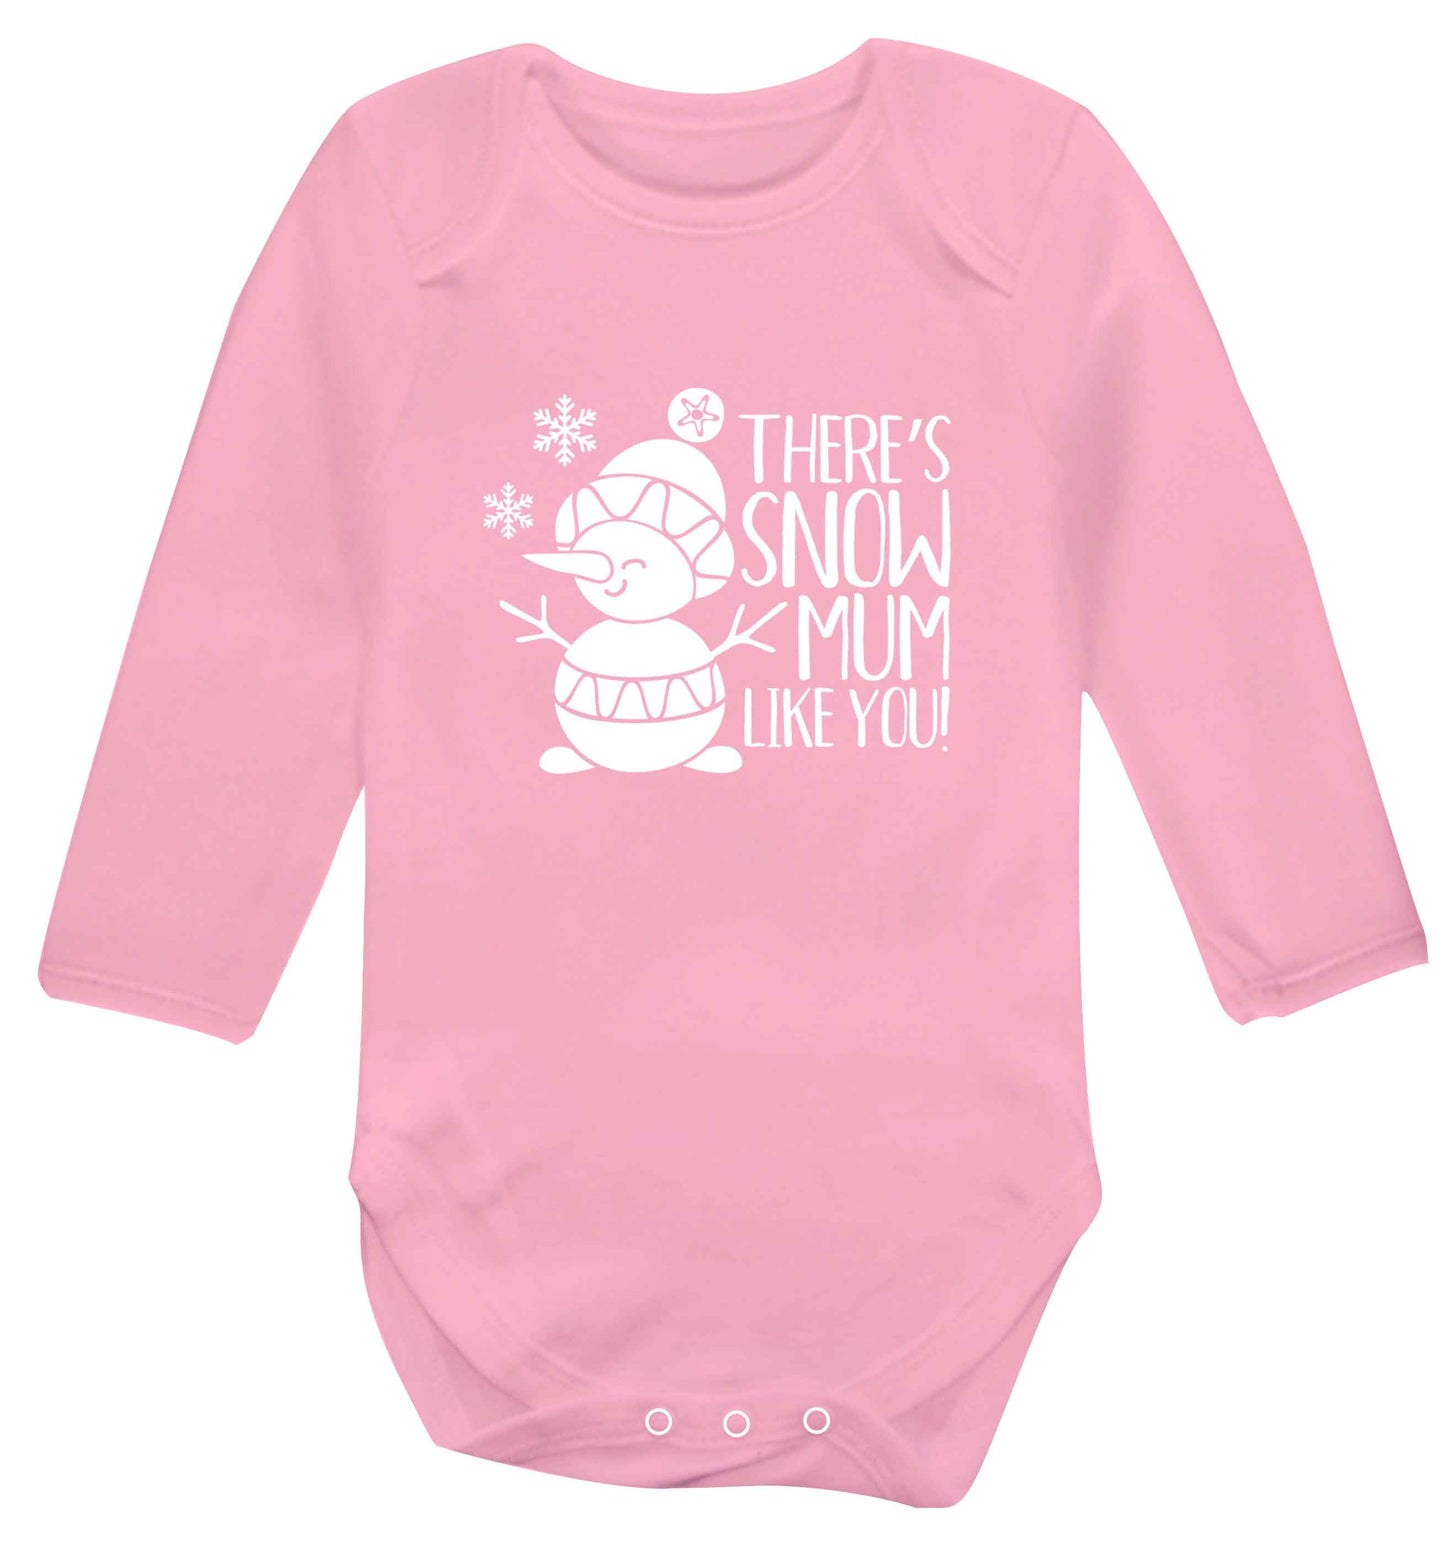 There's snow mum like you baby vest long sleeved pale pink 6-12 months